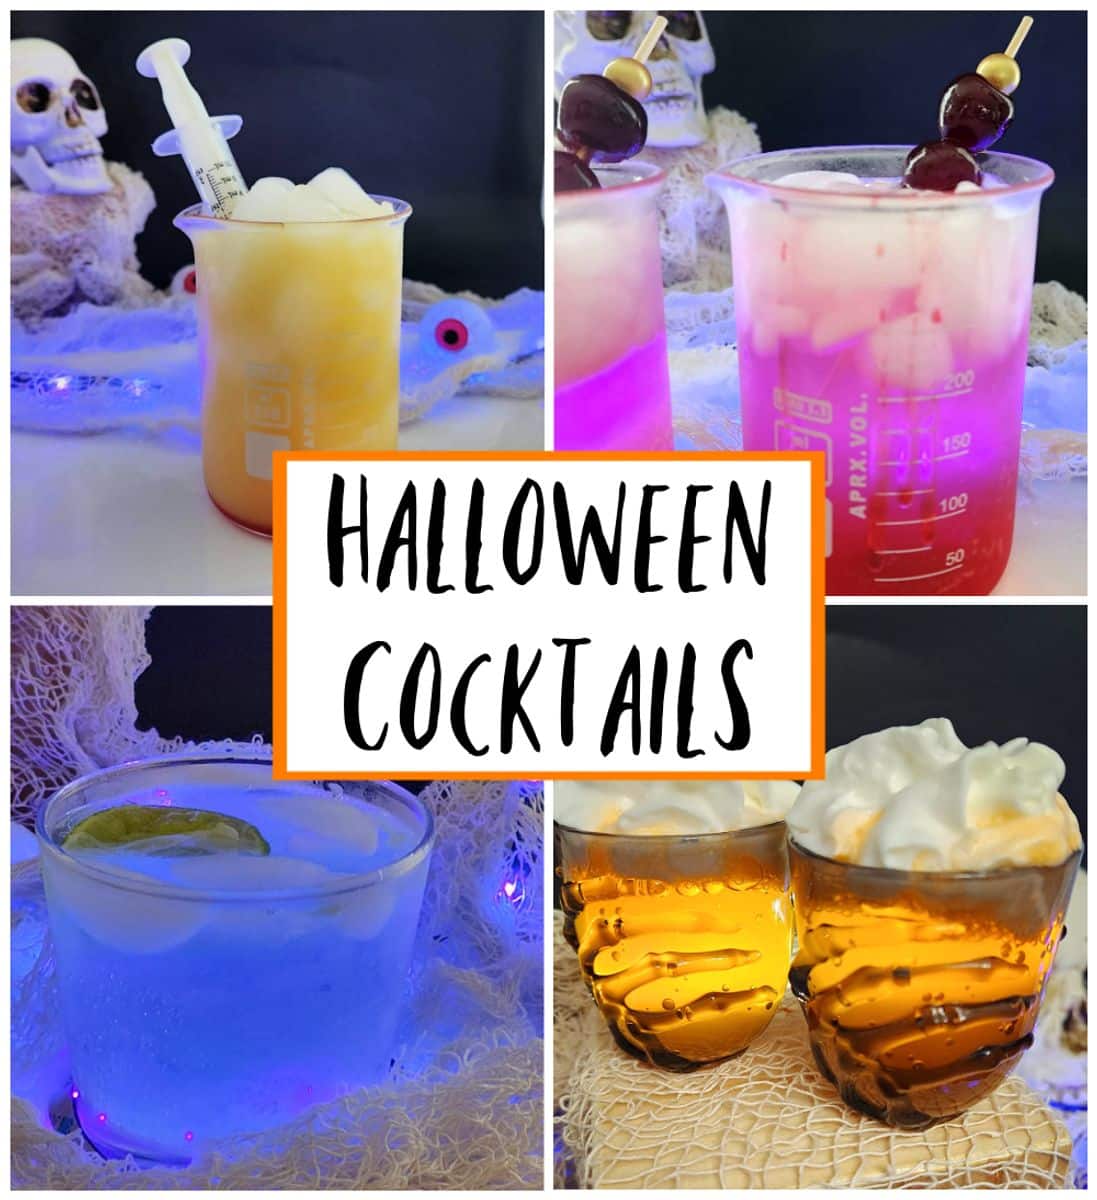 4 Simple Halloween Cocktails to Make at Home